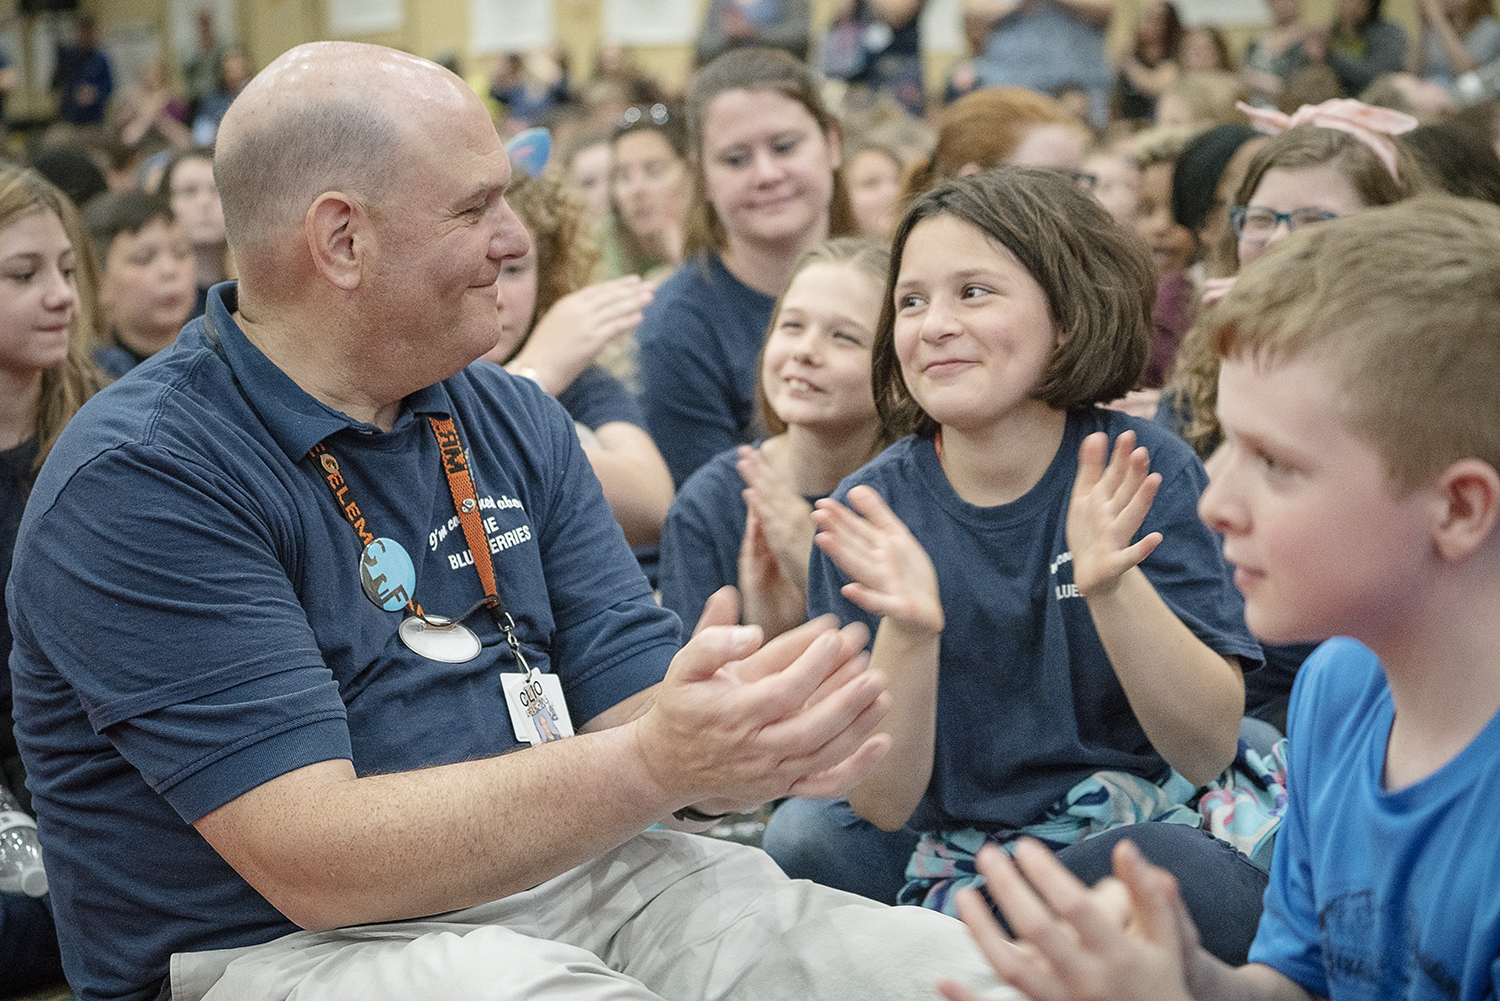 Flint, MI - Friday, May 4, 2018: Students from Garner Elementary in Clio applaud and admire elementary counselor David Griffel (left) as Blueberry Ambassadors were encouraged to recognize their teachers and mentors that accompanied them to the 5th An